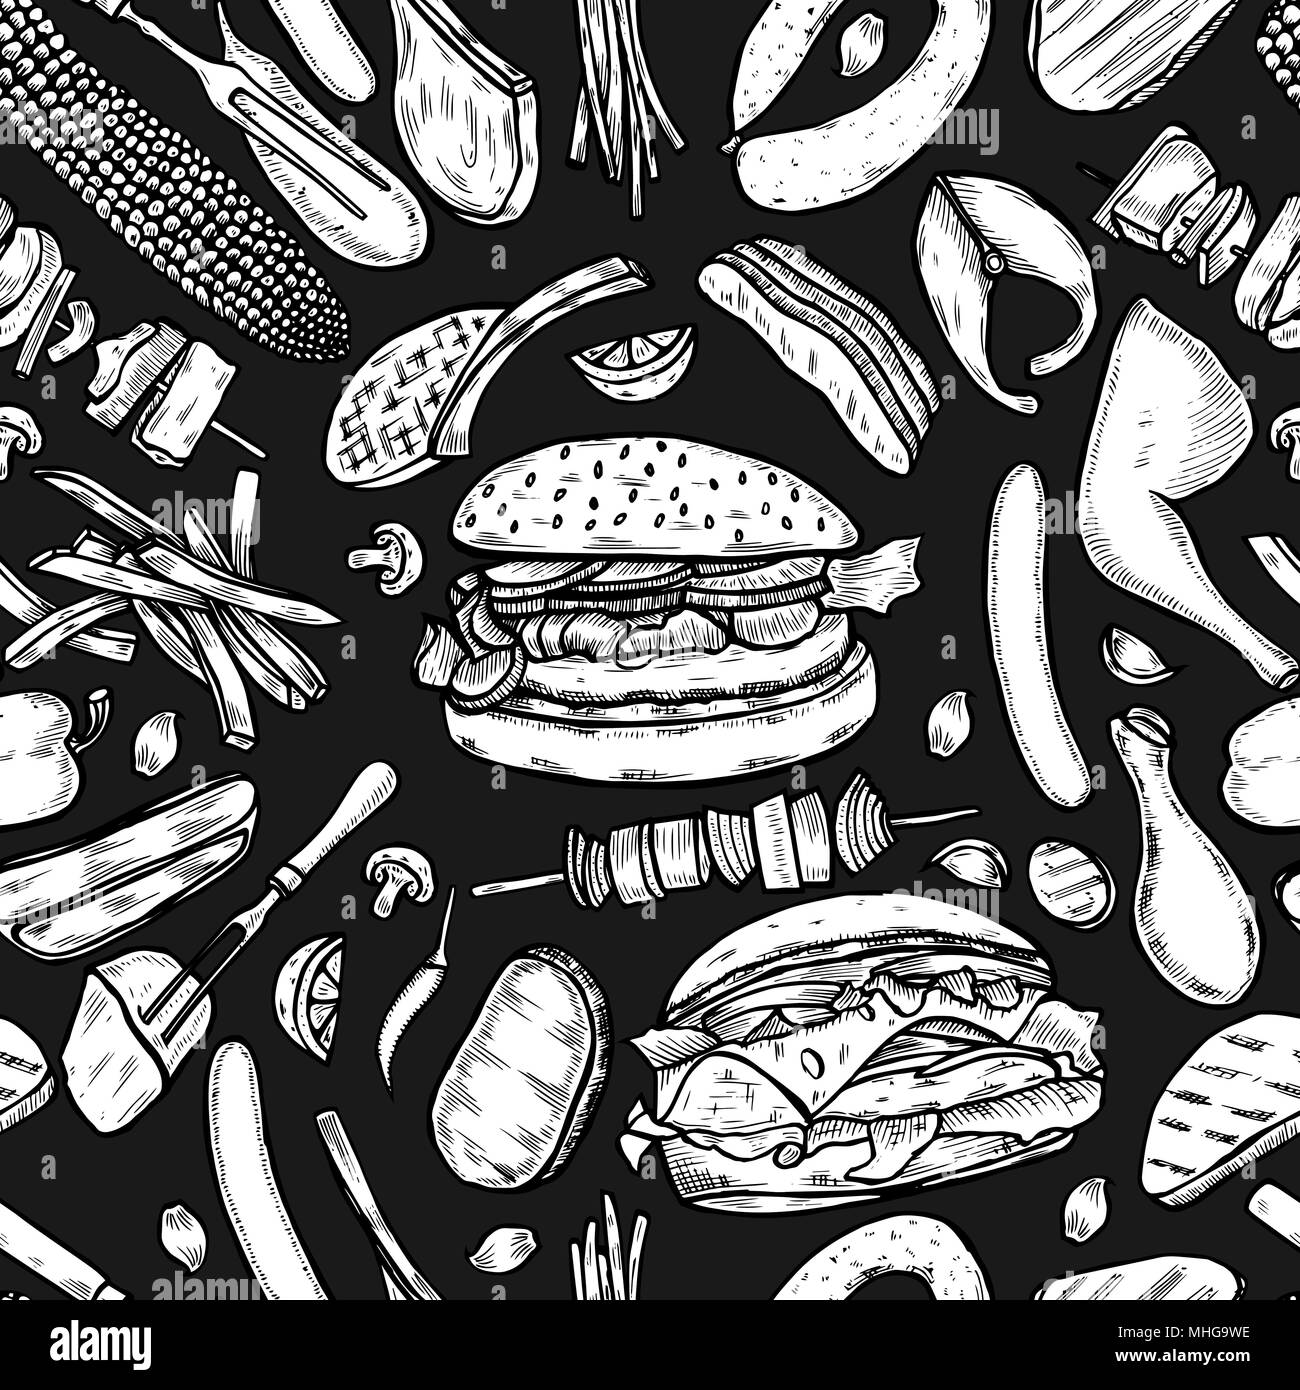 Vintage monochrome vector engraving Seamless pattern barbecue grill. Top view with charcoal, mushroom, tomato, pepper, sausage, lemon, kebab, fish and Stock Vector